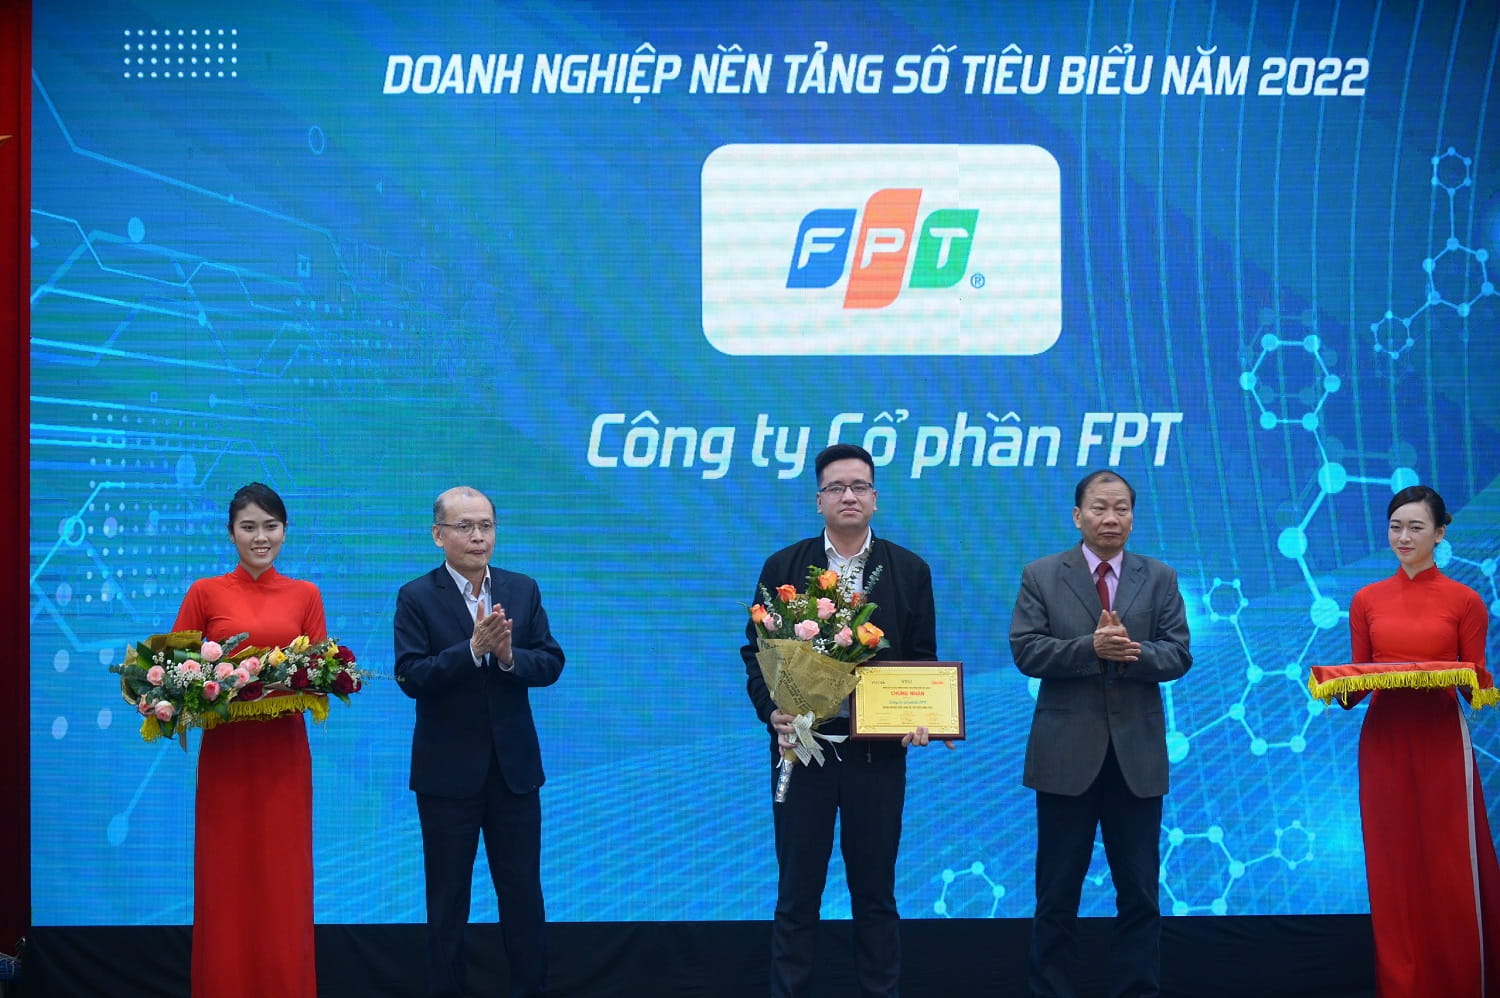 FPT's representative (in the middle of the picture) received the "Top Enterprises with Digital Platforms" award